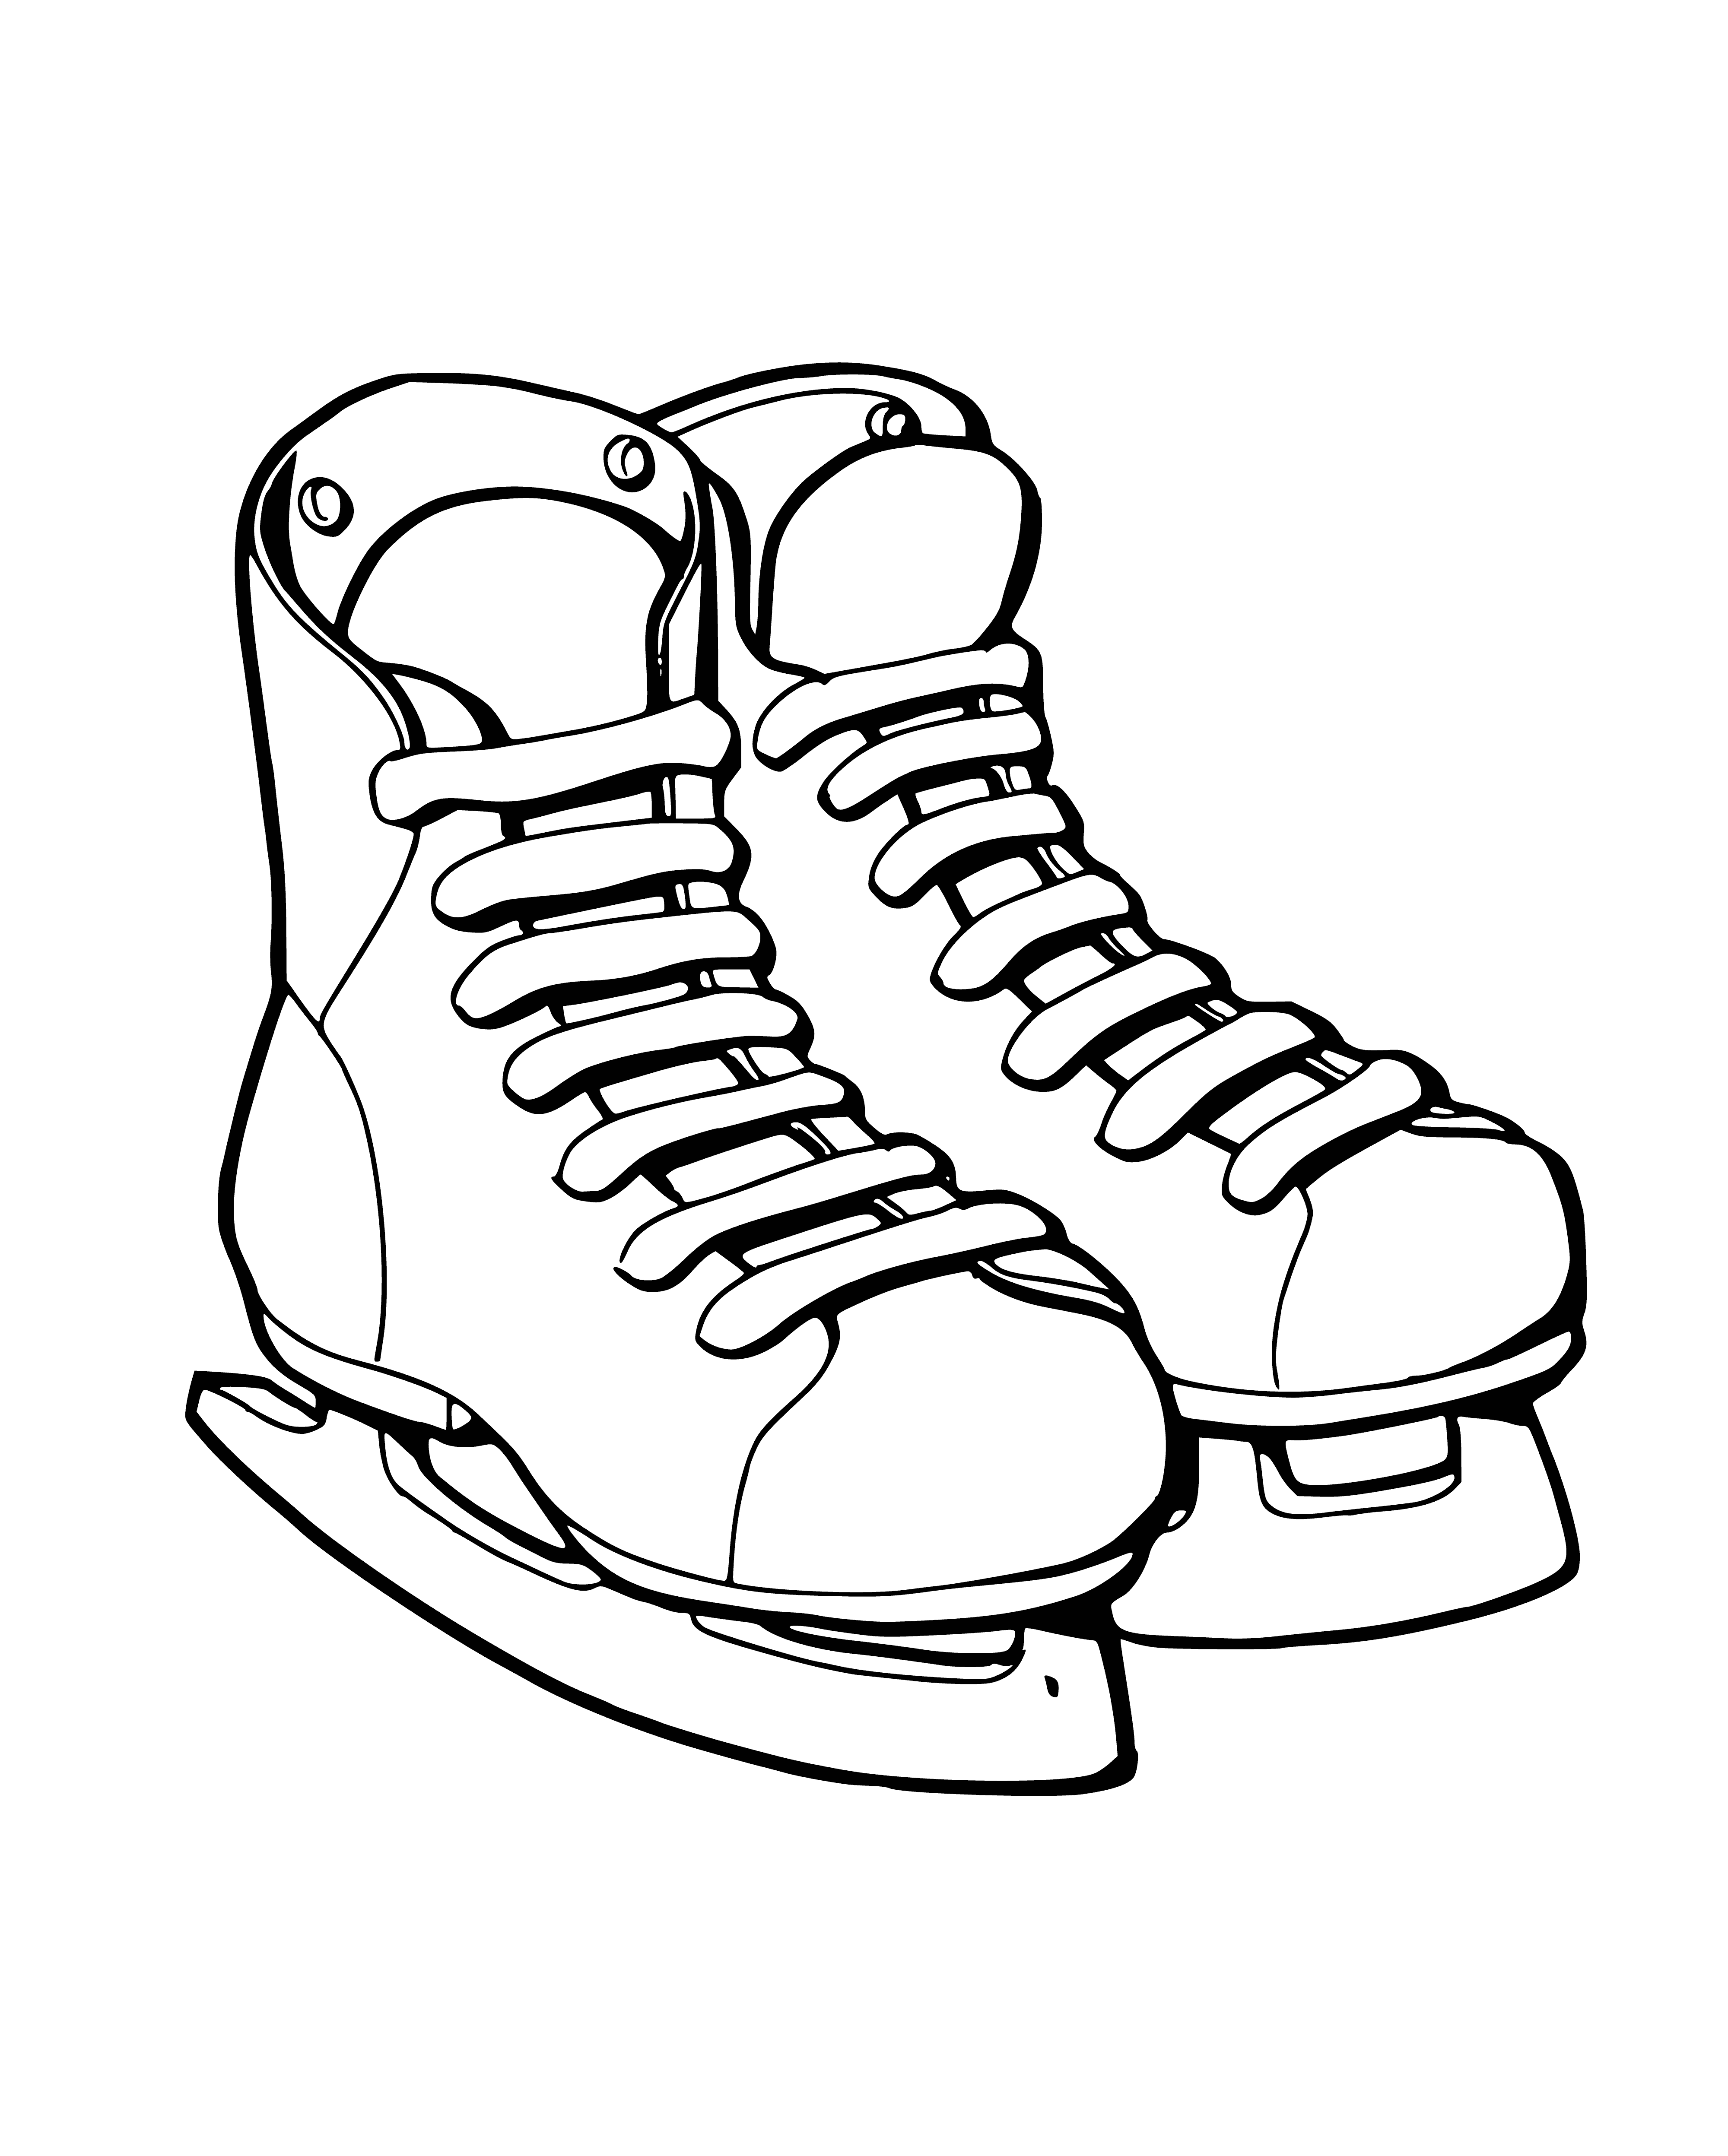 coloring page: A pair of hockey skates: black with white laces, padded tongue and metal blade.